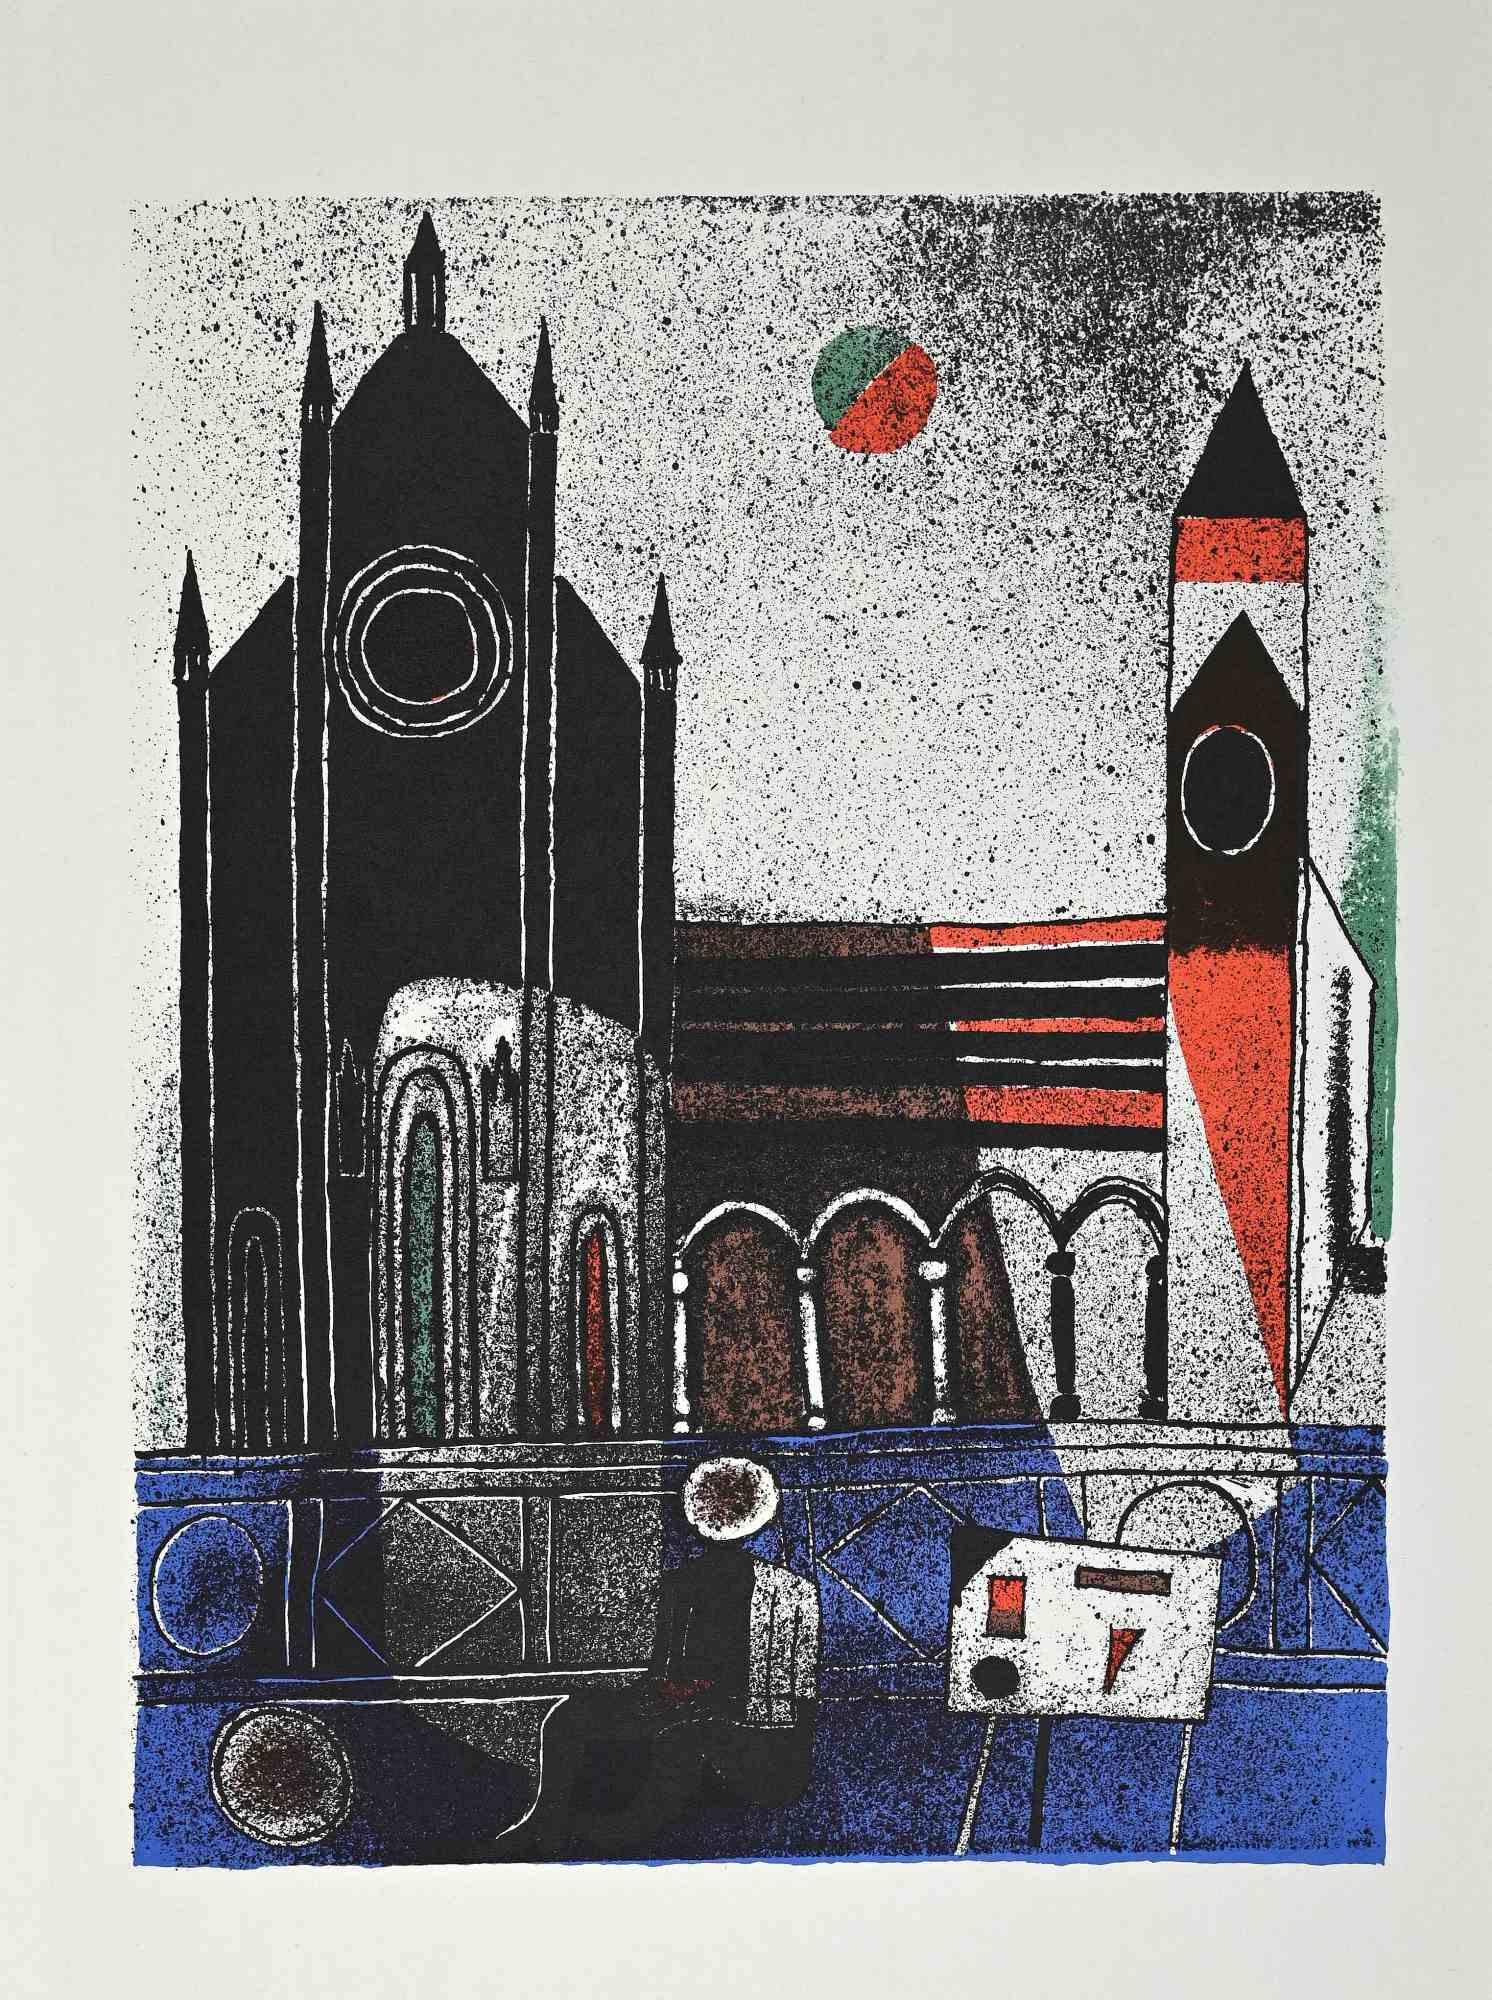 The Cathedral is a Vintage Offset Print on ivory-colored paper, realized by  Franco Gentilini (Italian Painter, 1909-1981), in the 1970s.

The state of preservation of the artwork is excellent.

Franco Gentilini (Italian Painter, 1909-1981):